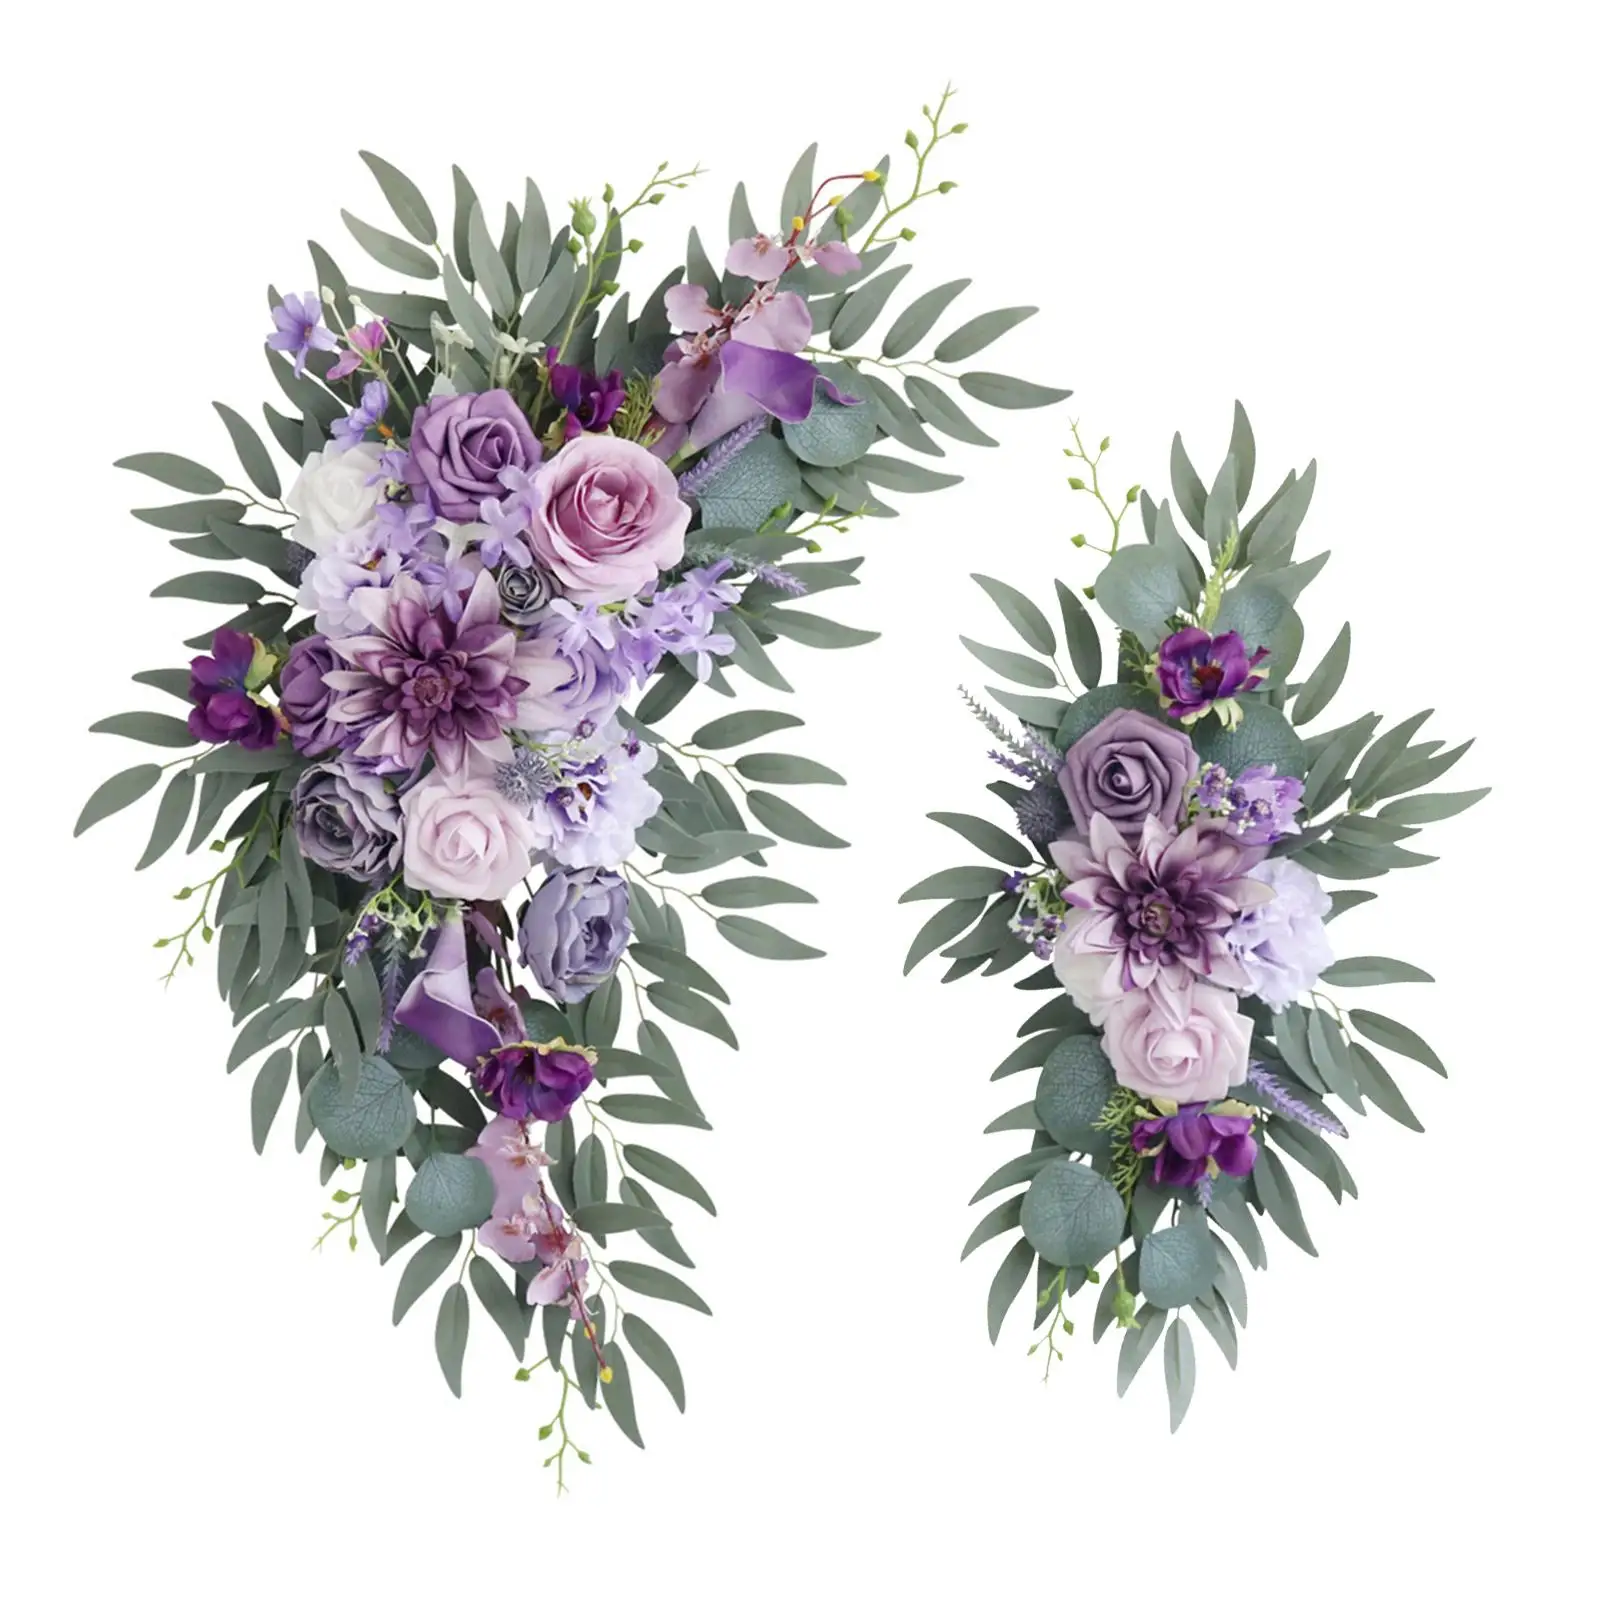 2 Pieces Simulation Wedding Floral Swags Floral Decorations for Wedding Home